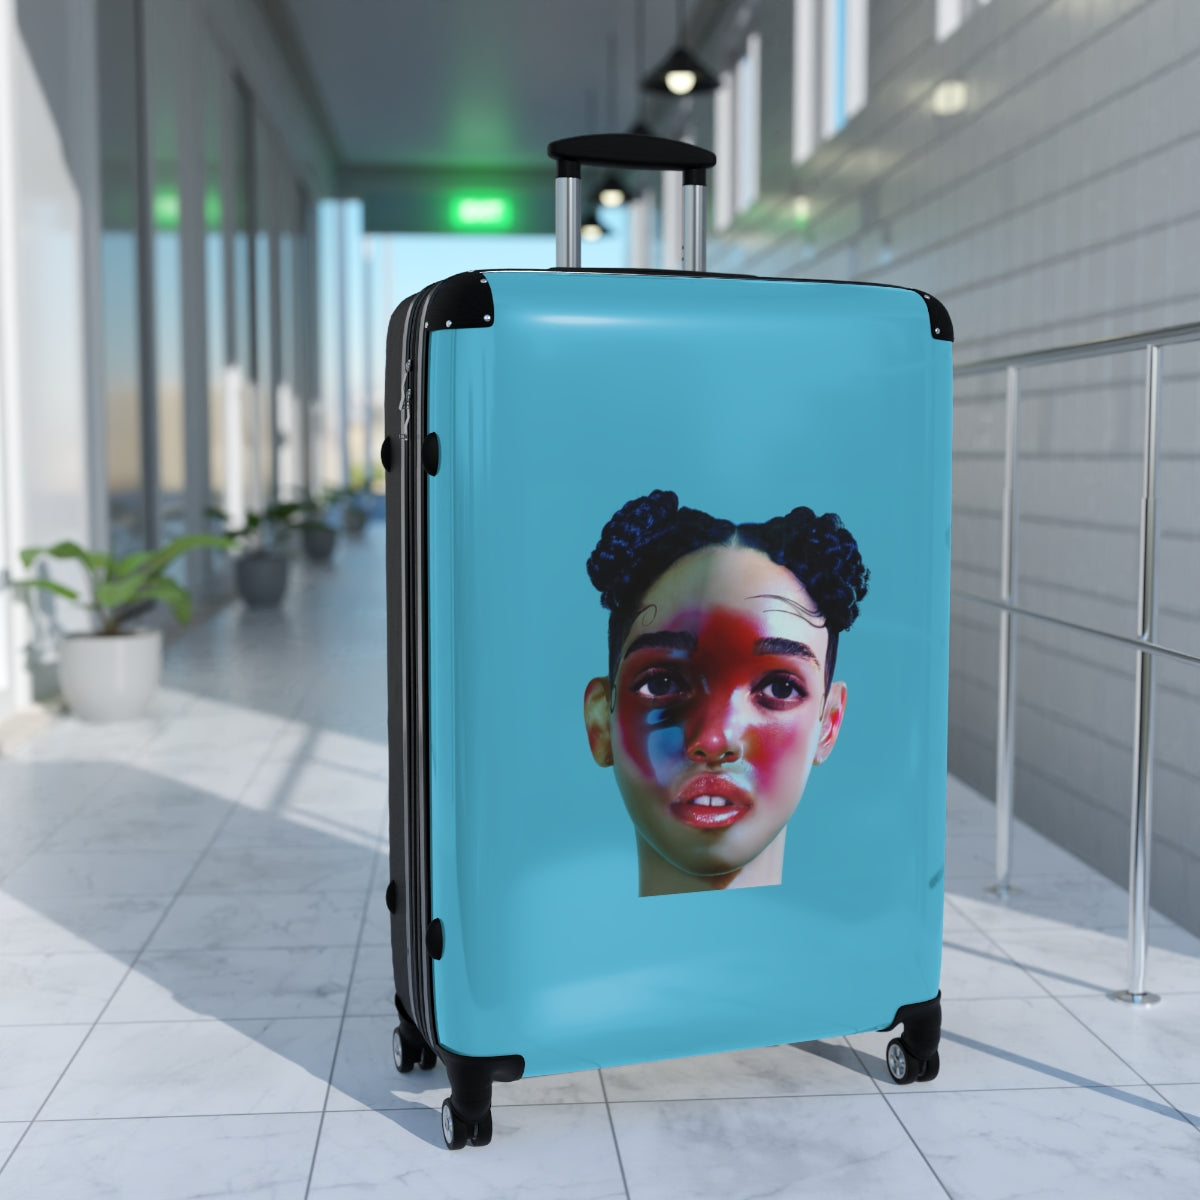 Getrott FKA Twigs LP1 2014 Blue Cabin Suitcase Inner Pockets Extended Storage Adjustable Telescopic Handle Inner Pockets Double wheeled Polycarbonate Hard-shell Built-in Lock